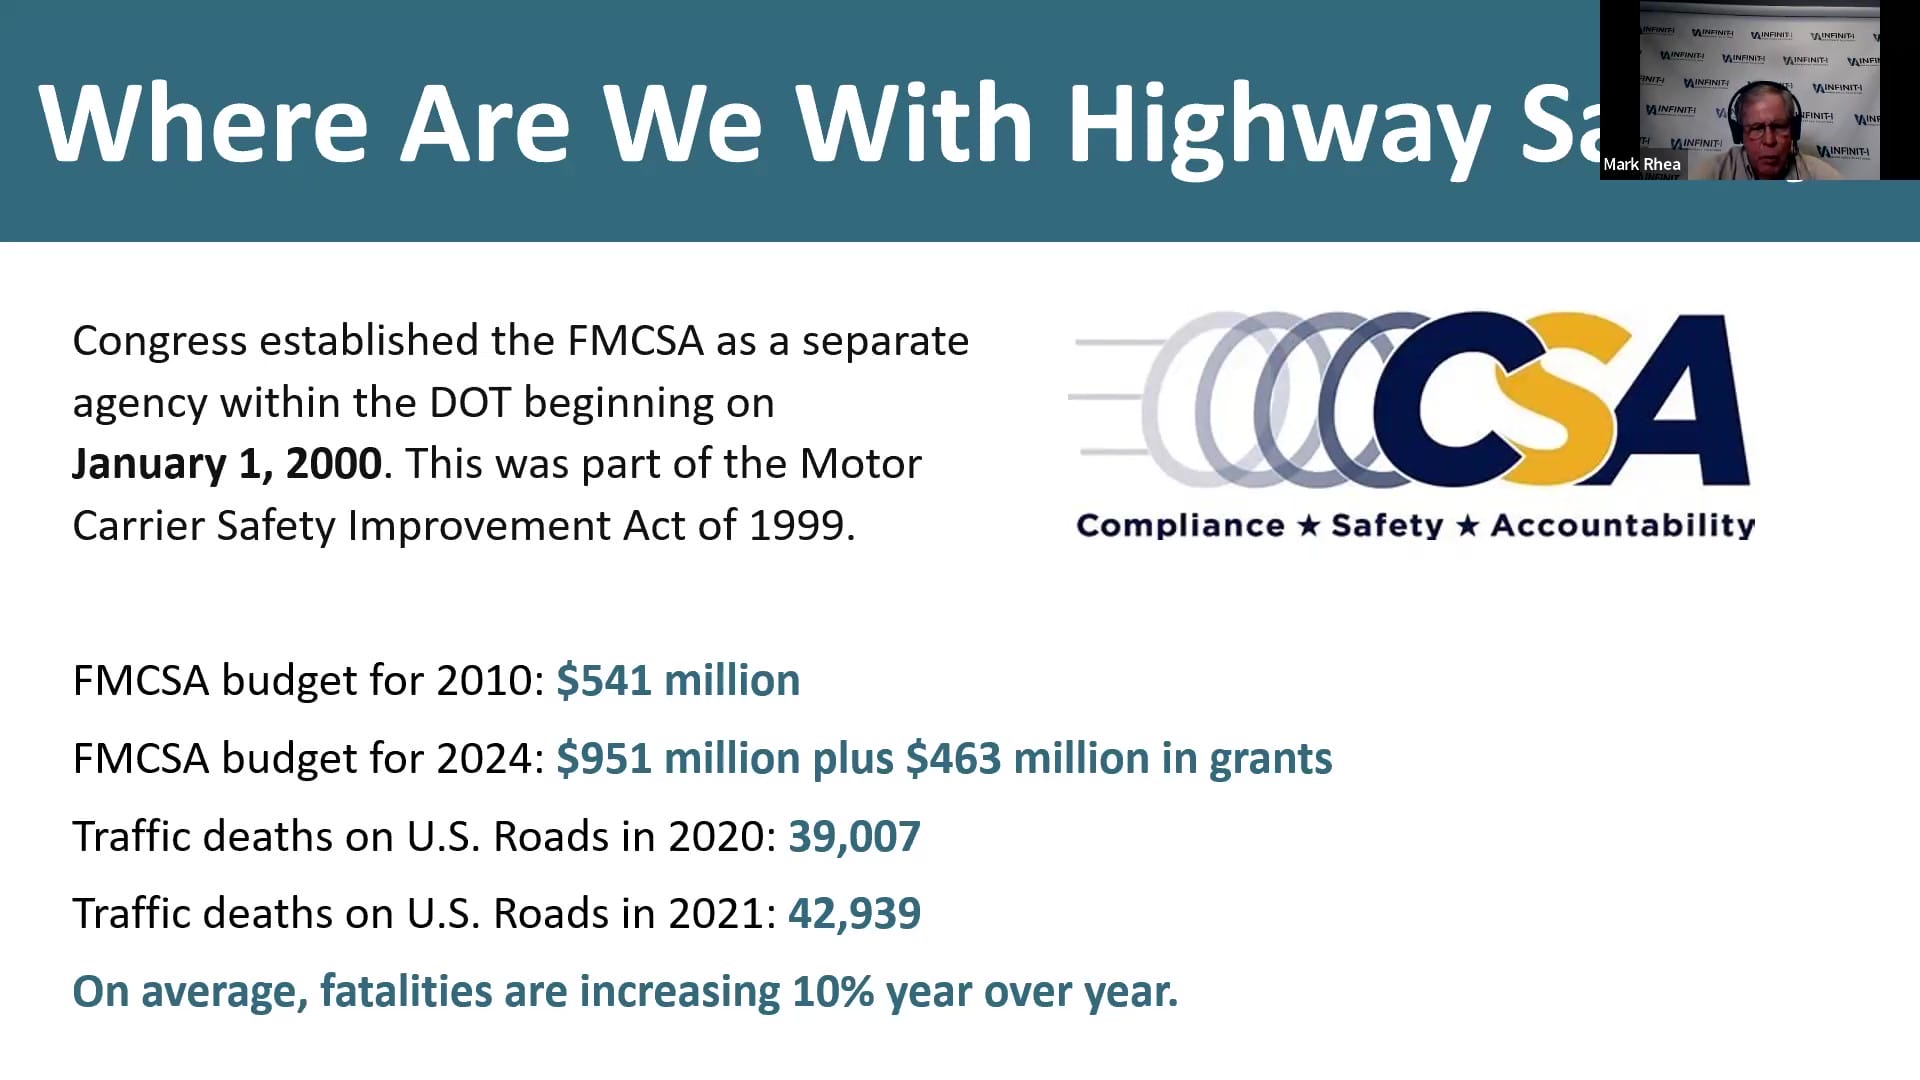 Highway Safety Fatalities Increasing 10% YOY